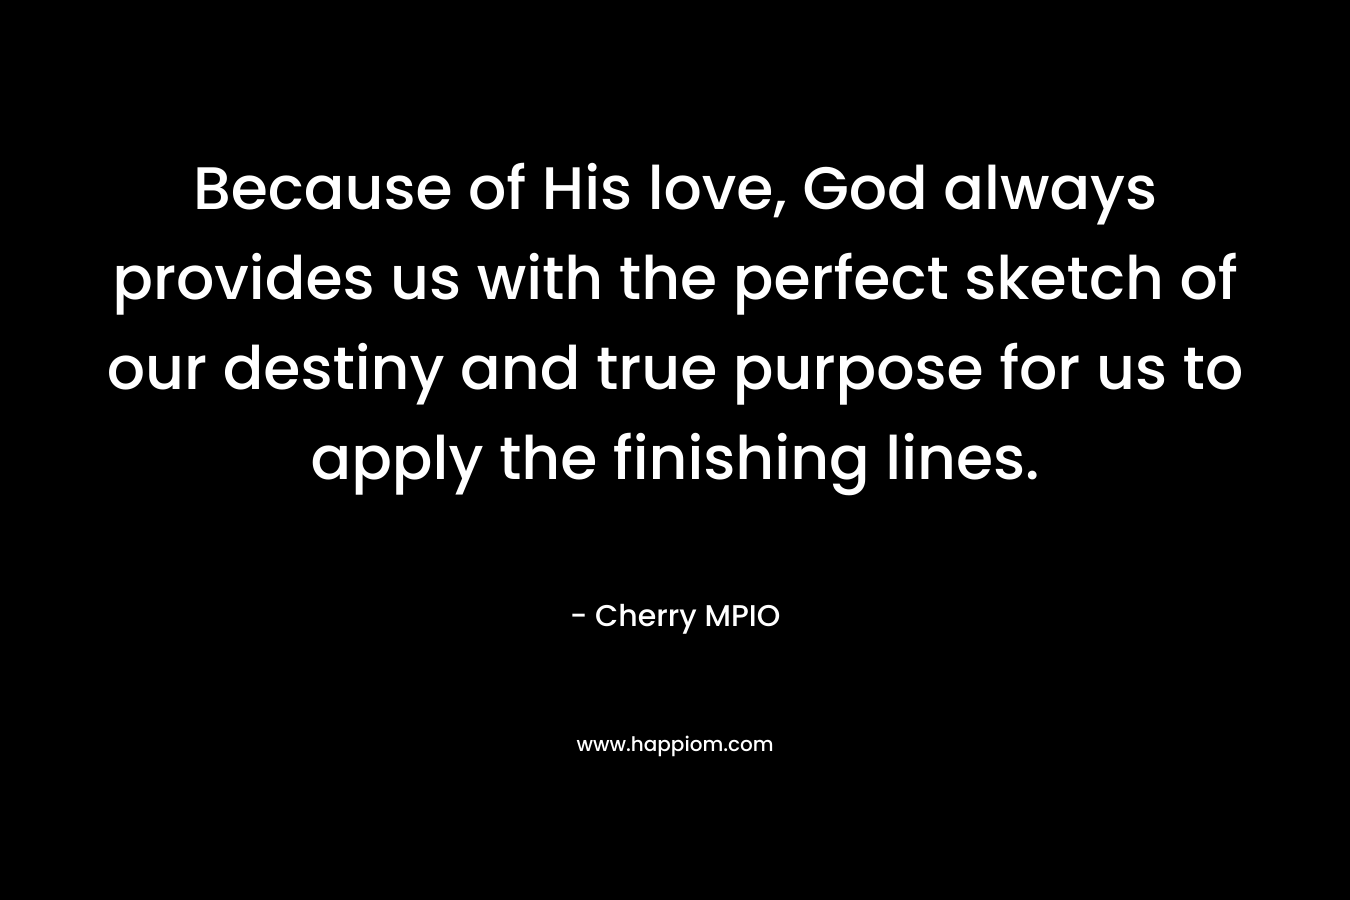 Because of His love, God always provides us with the perfect sketch of our destiny and true purpose for us to apply the finishing lines.